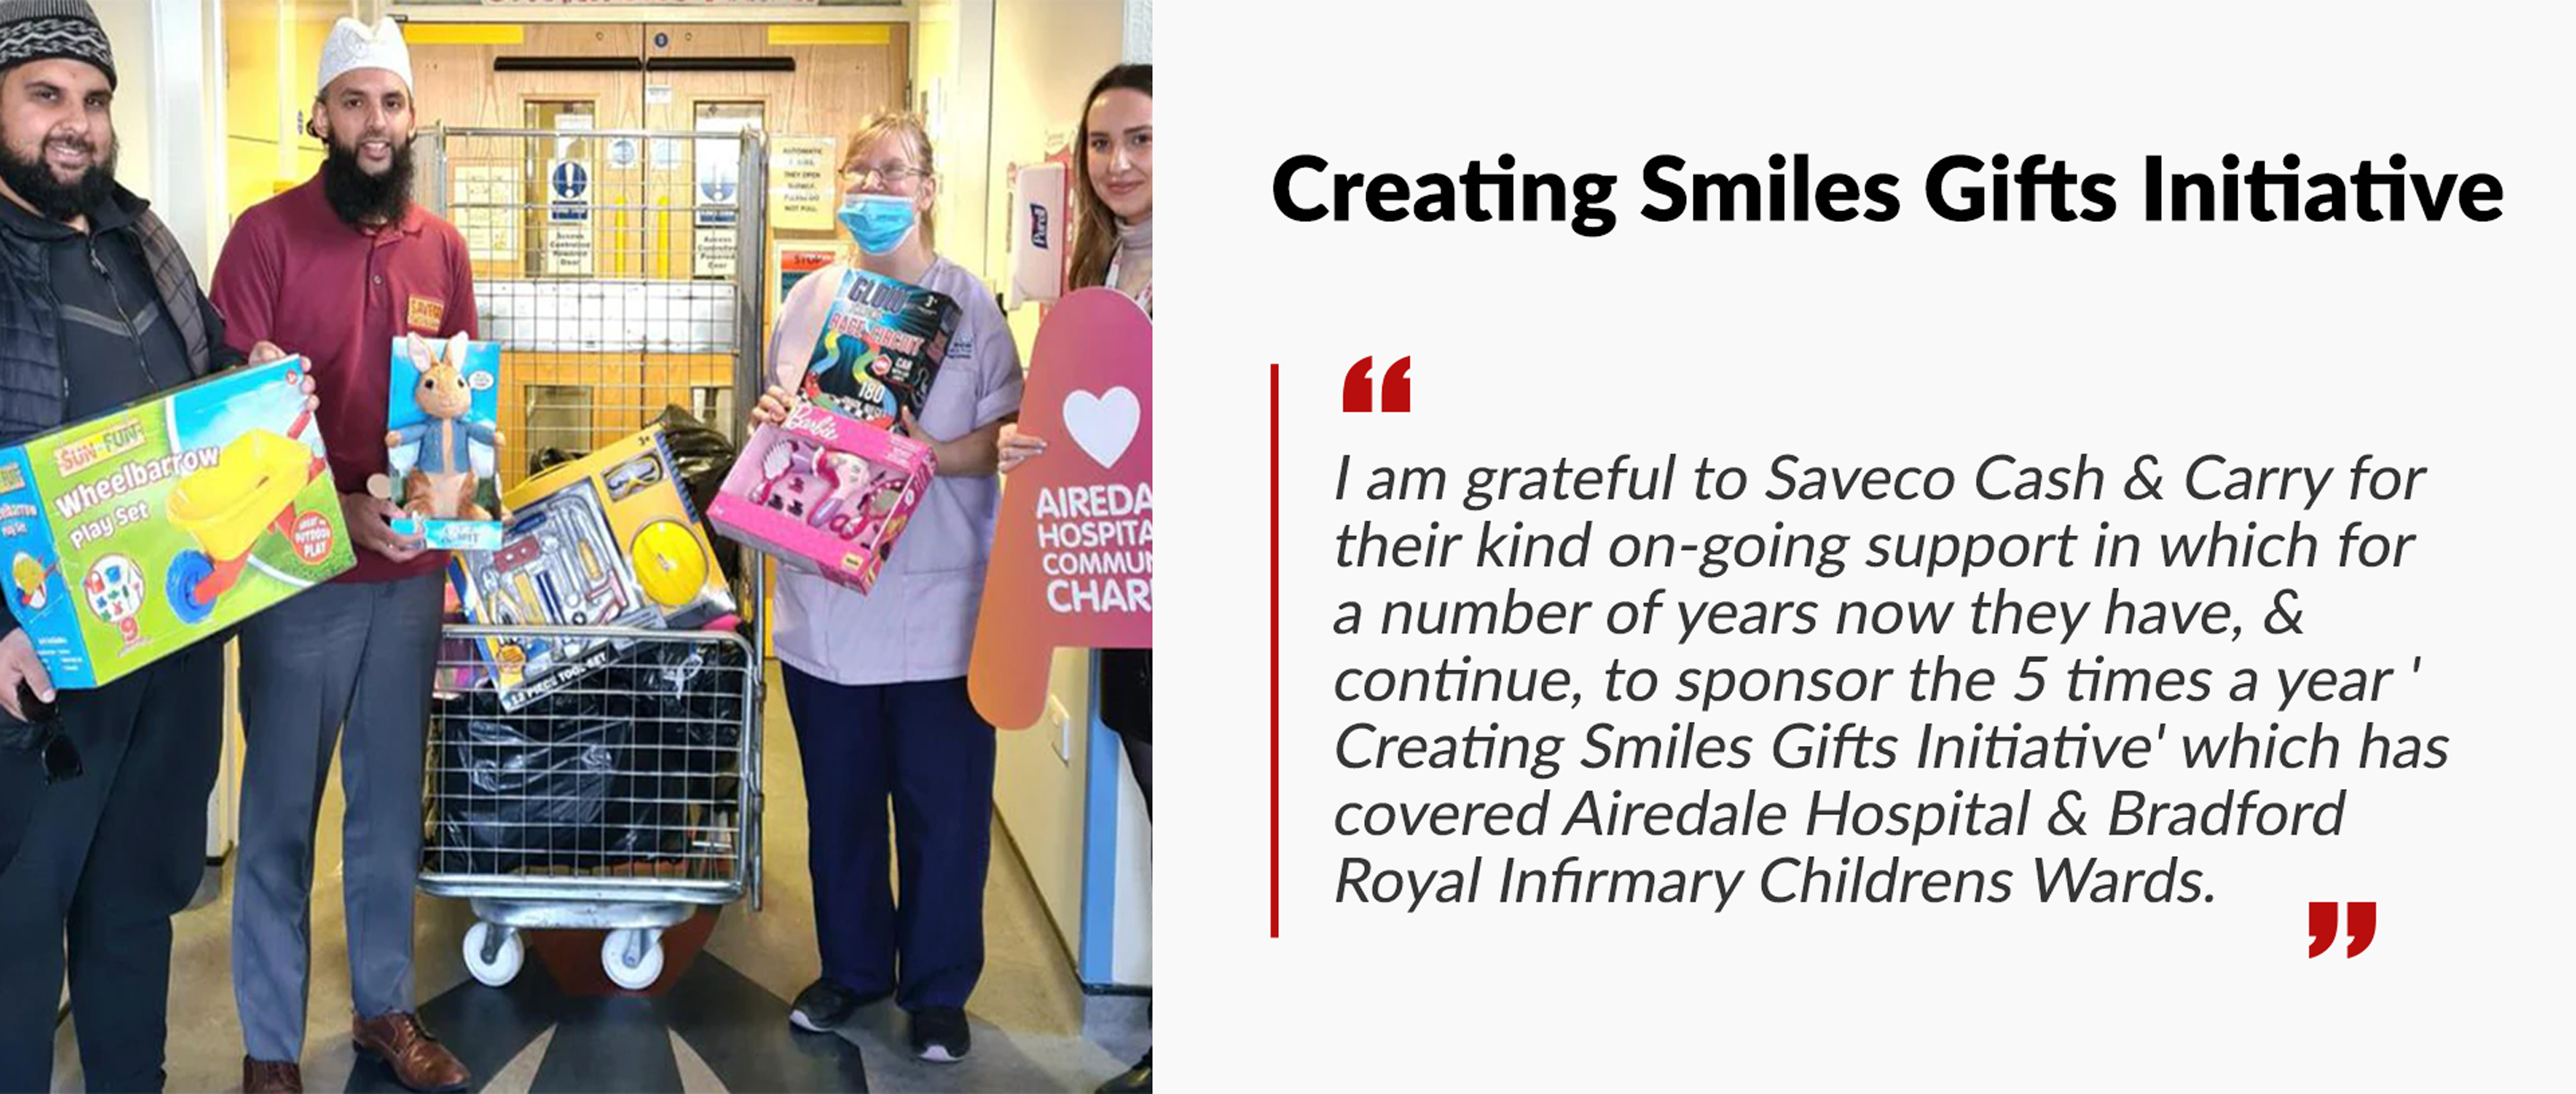 Creating Smiles Gifts Initiatives